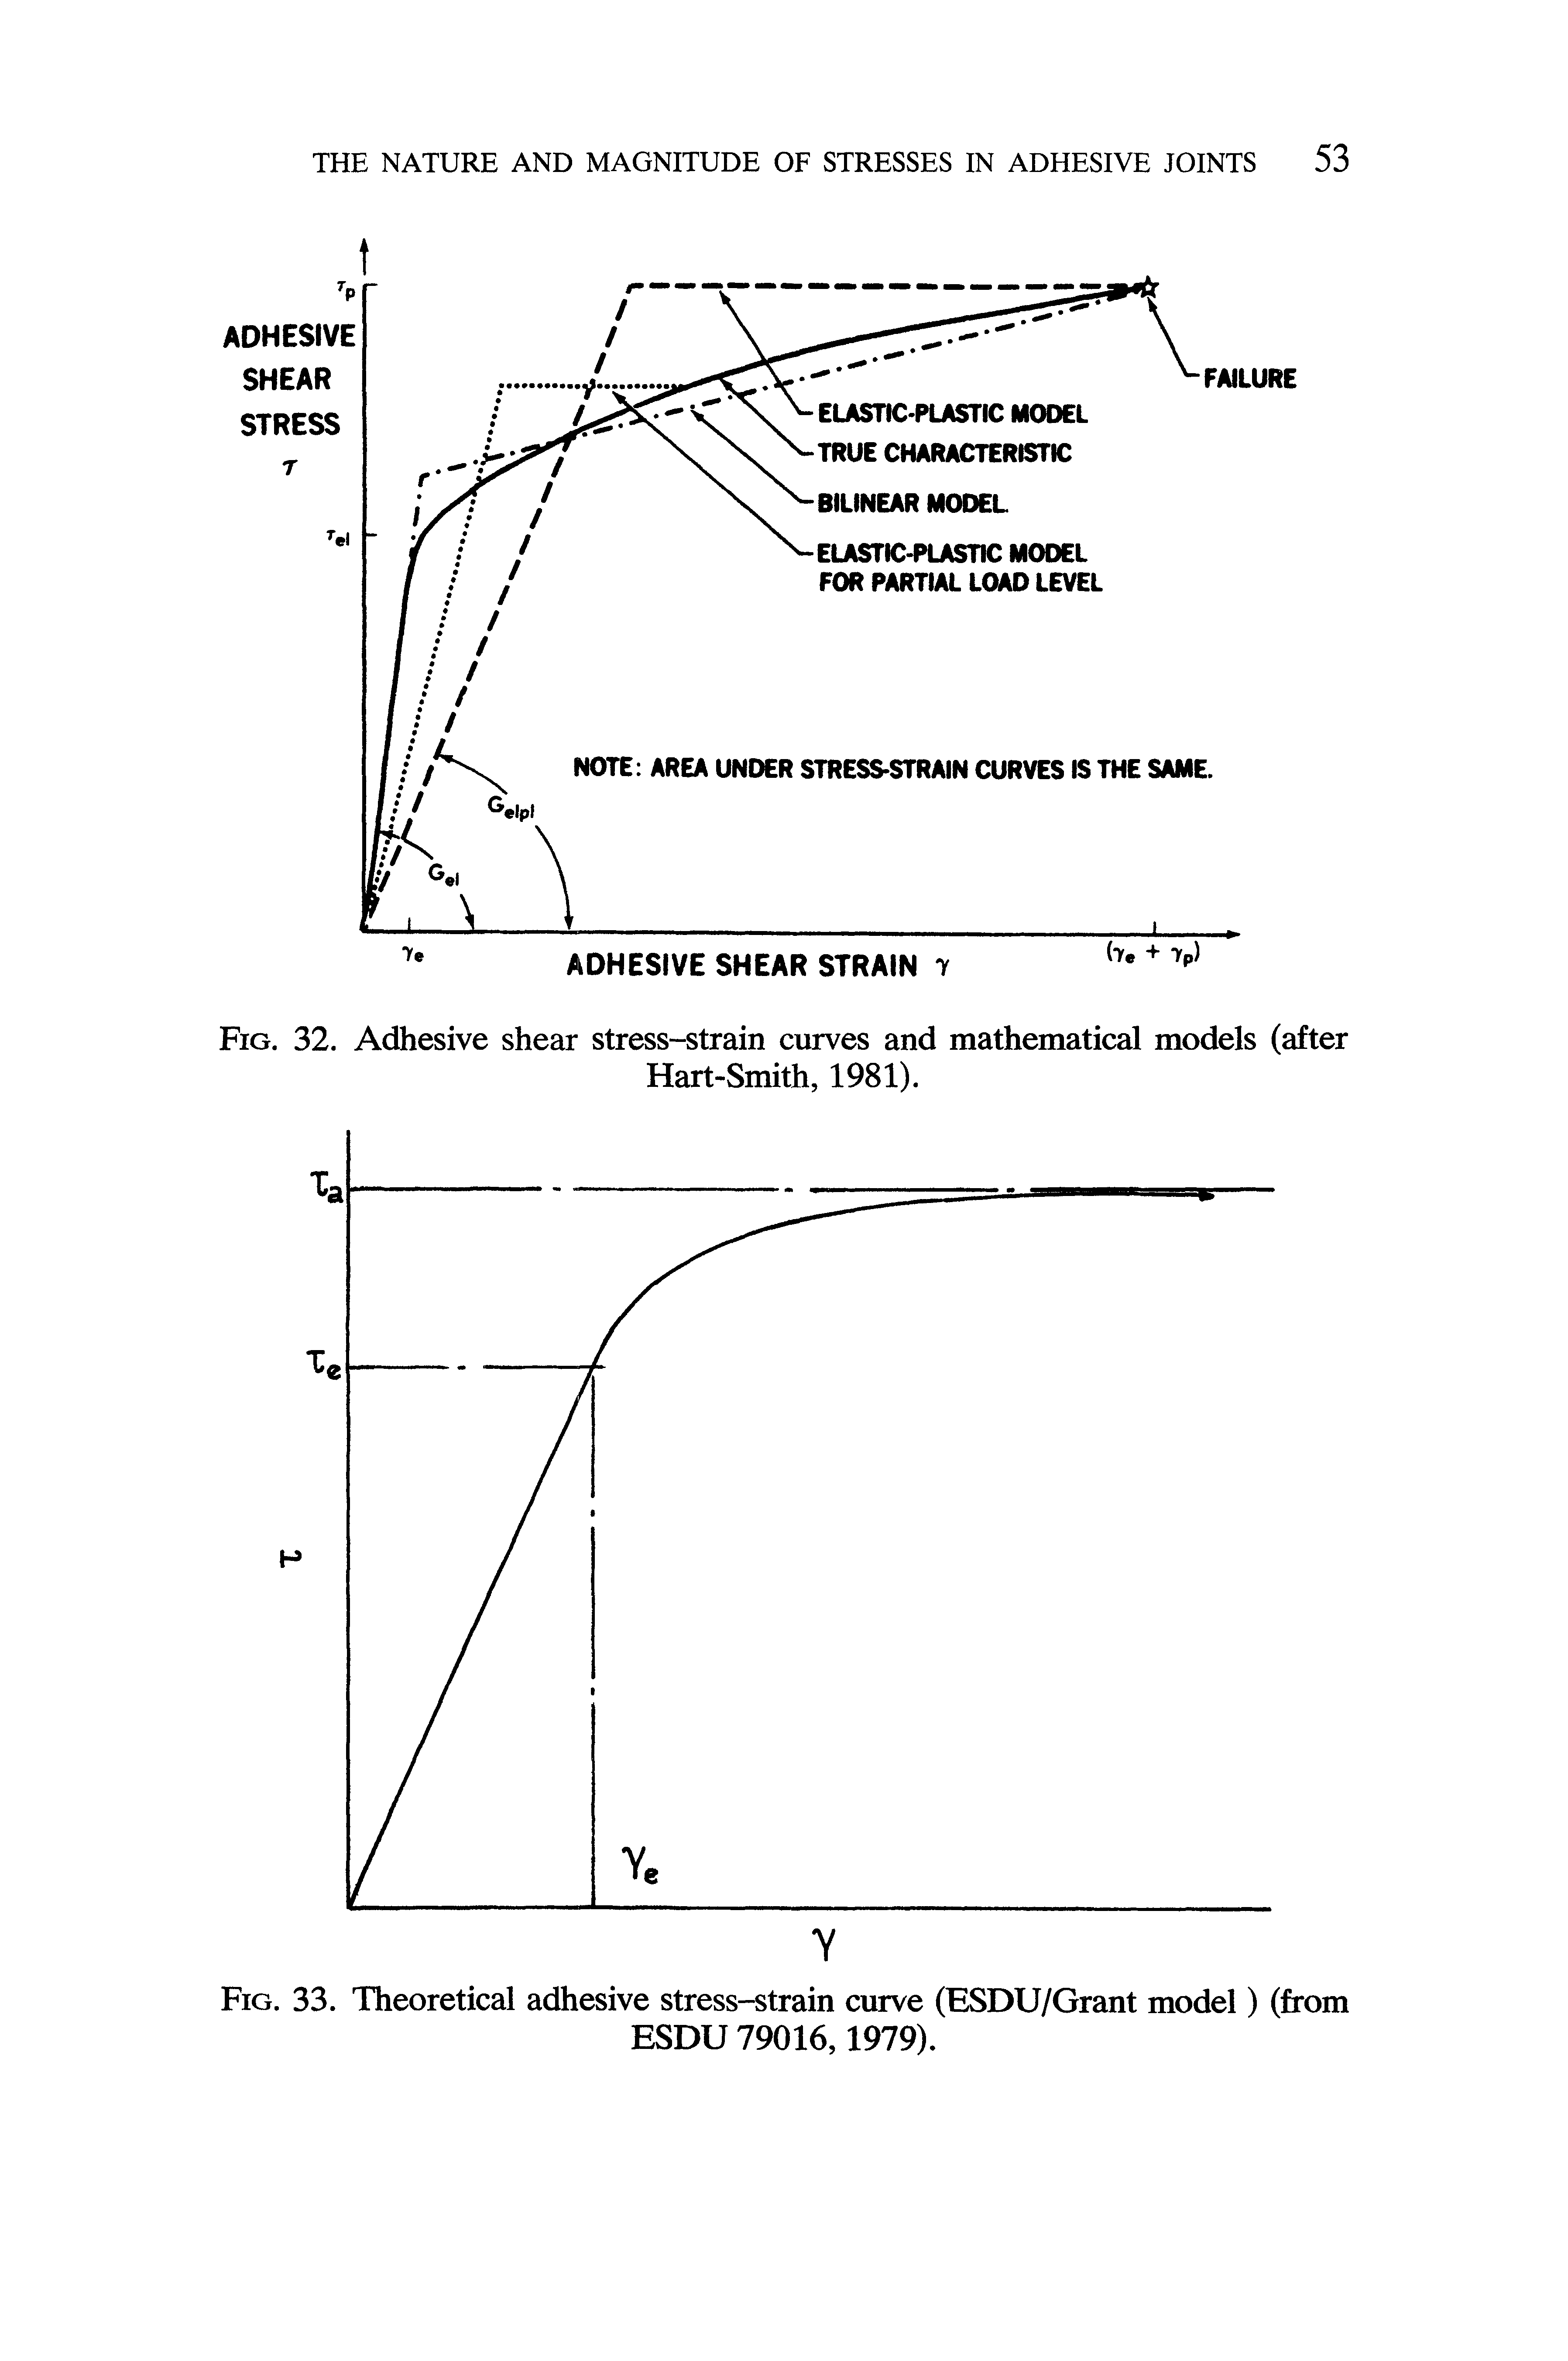 Fig. 32. Adhesive shear stress-strain curves and mathematical models (after...